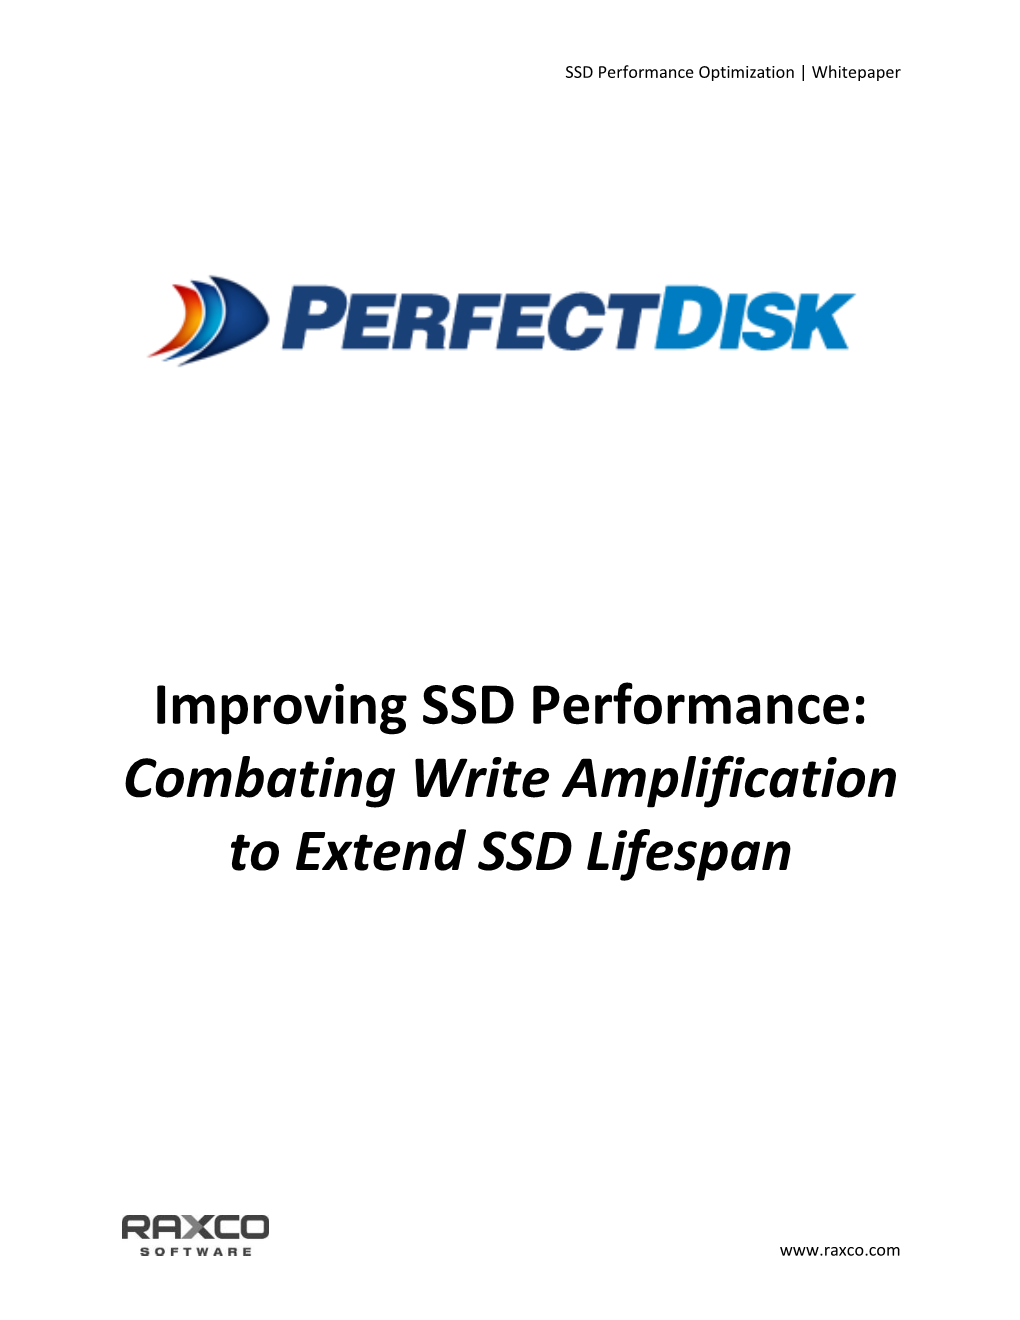 Improving SSD Performance: Combating Write Amplification to Extend SSD Lifespan